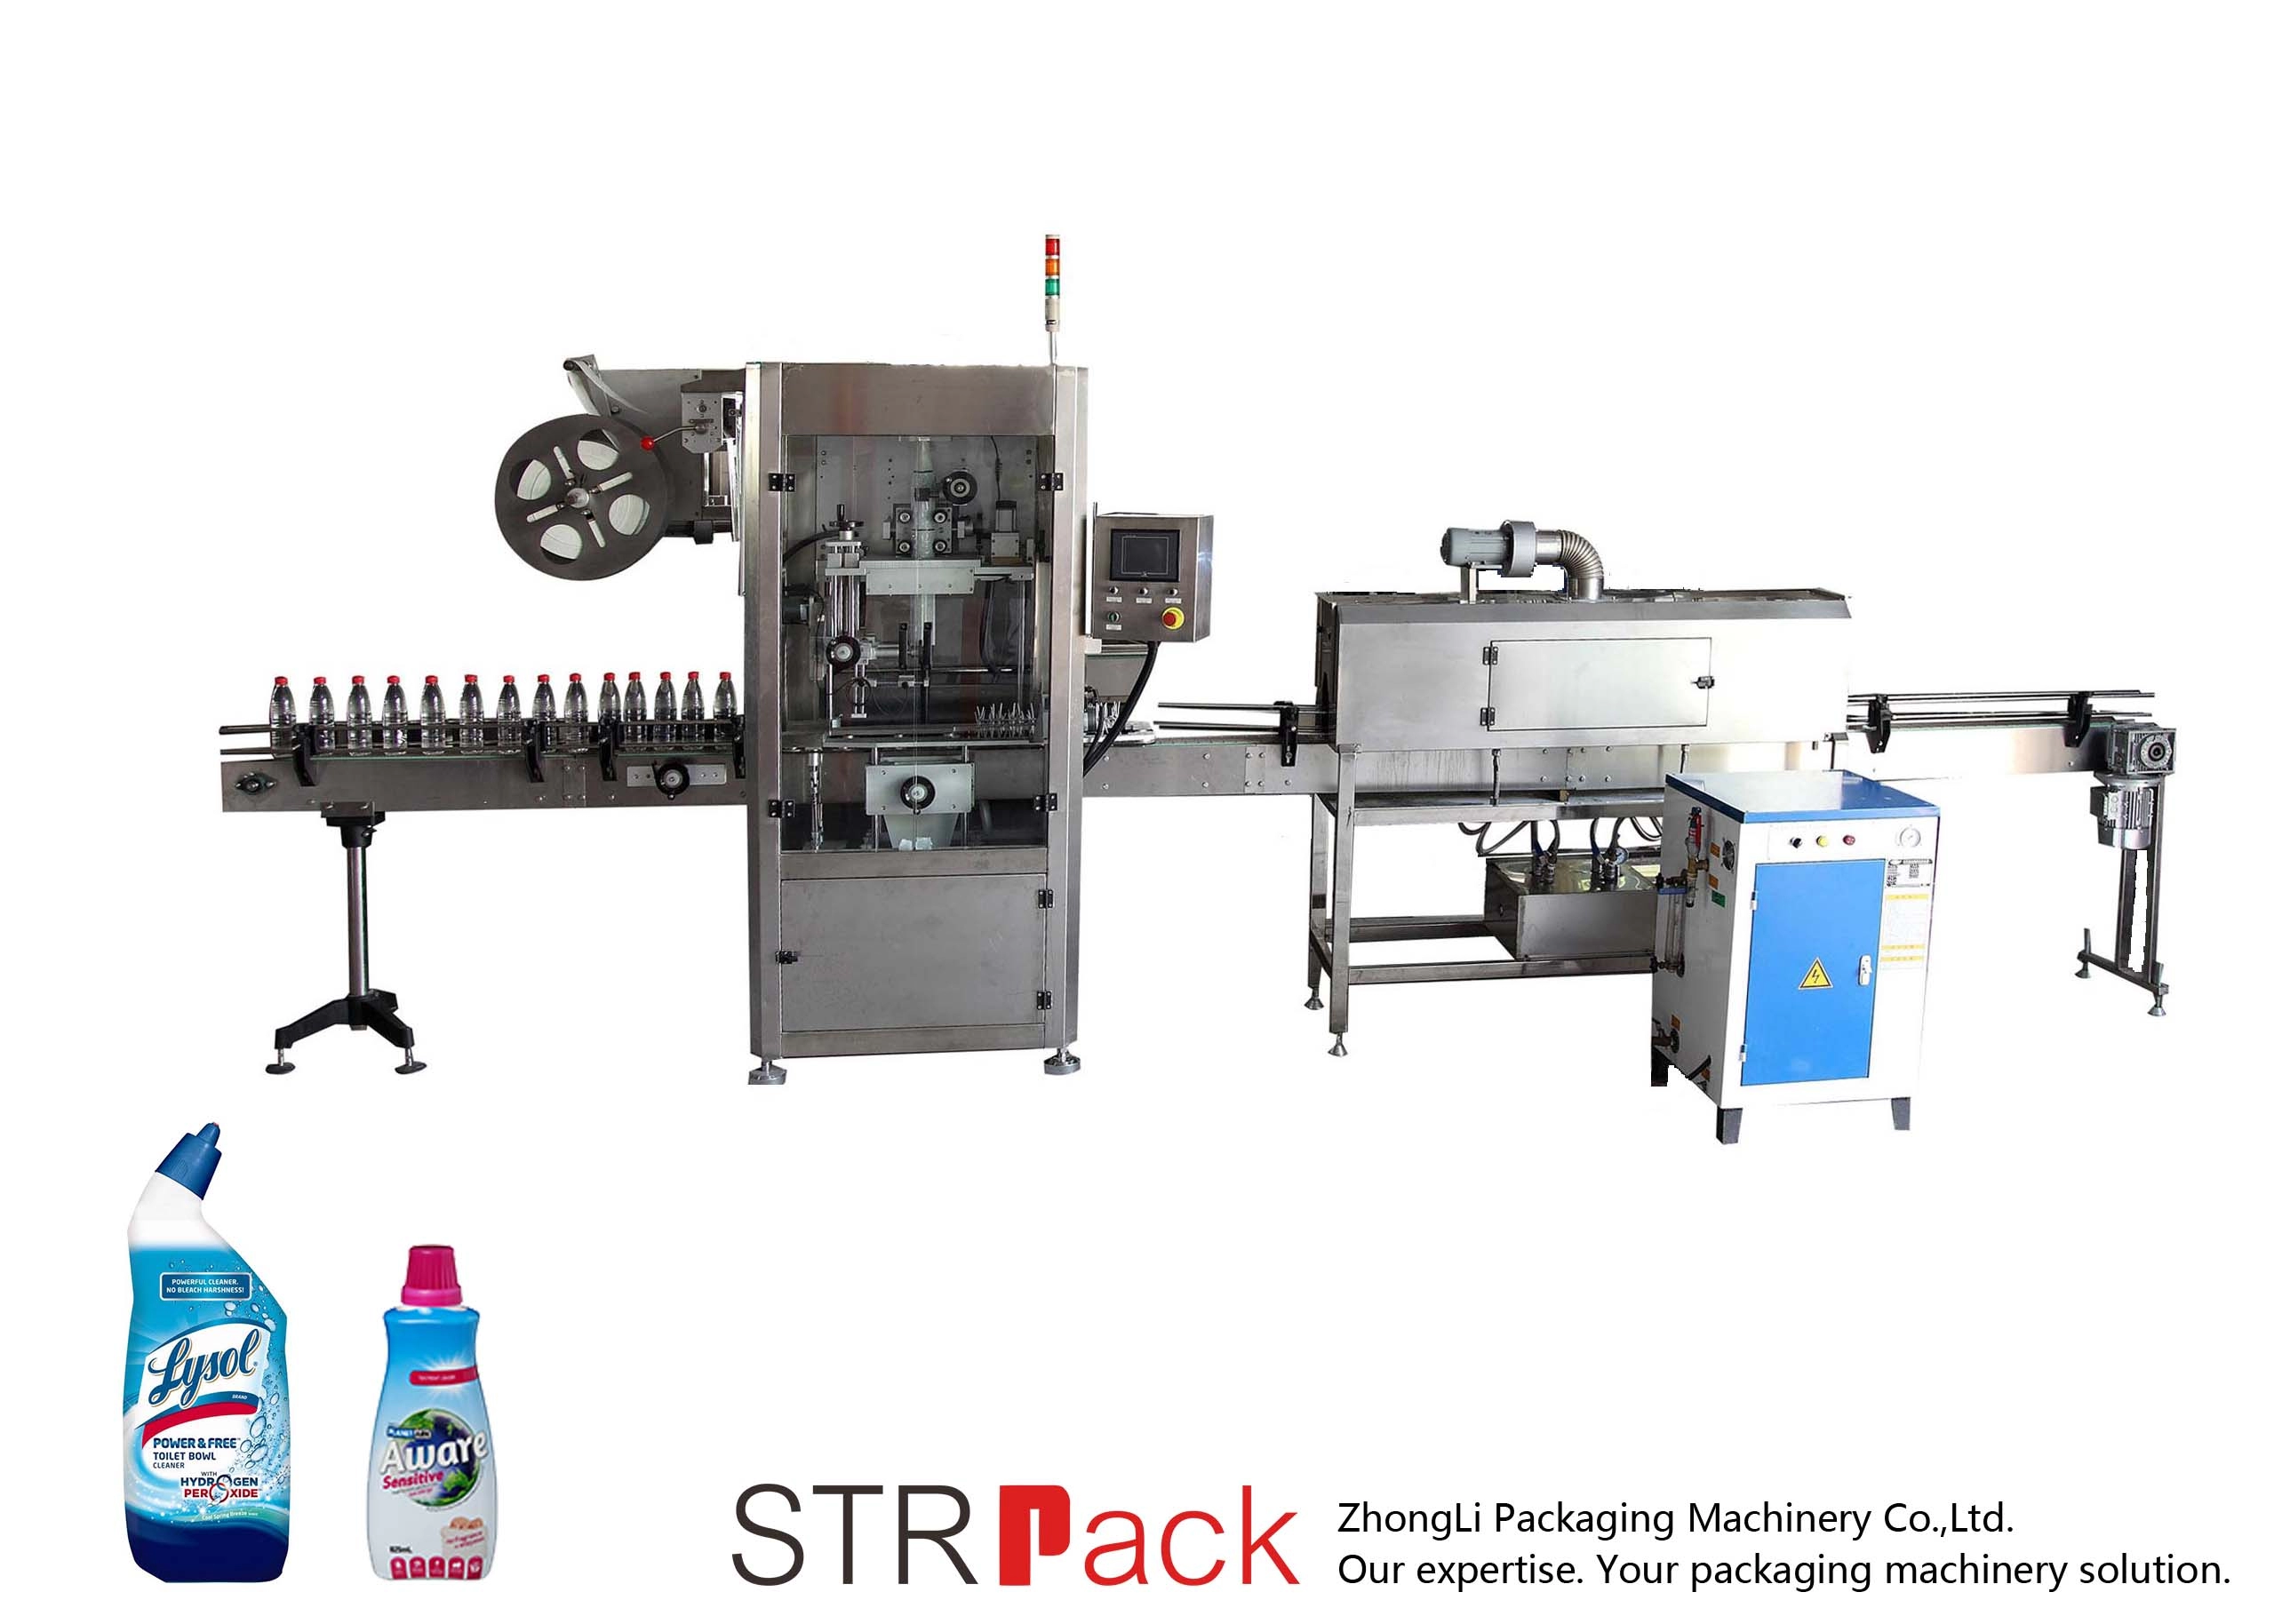 Automatic Label Sleeving and Shrinking Machine